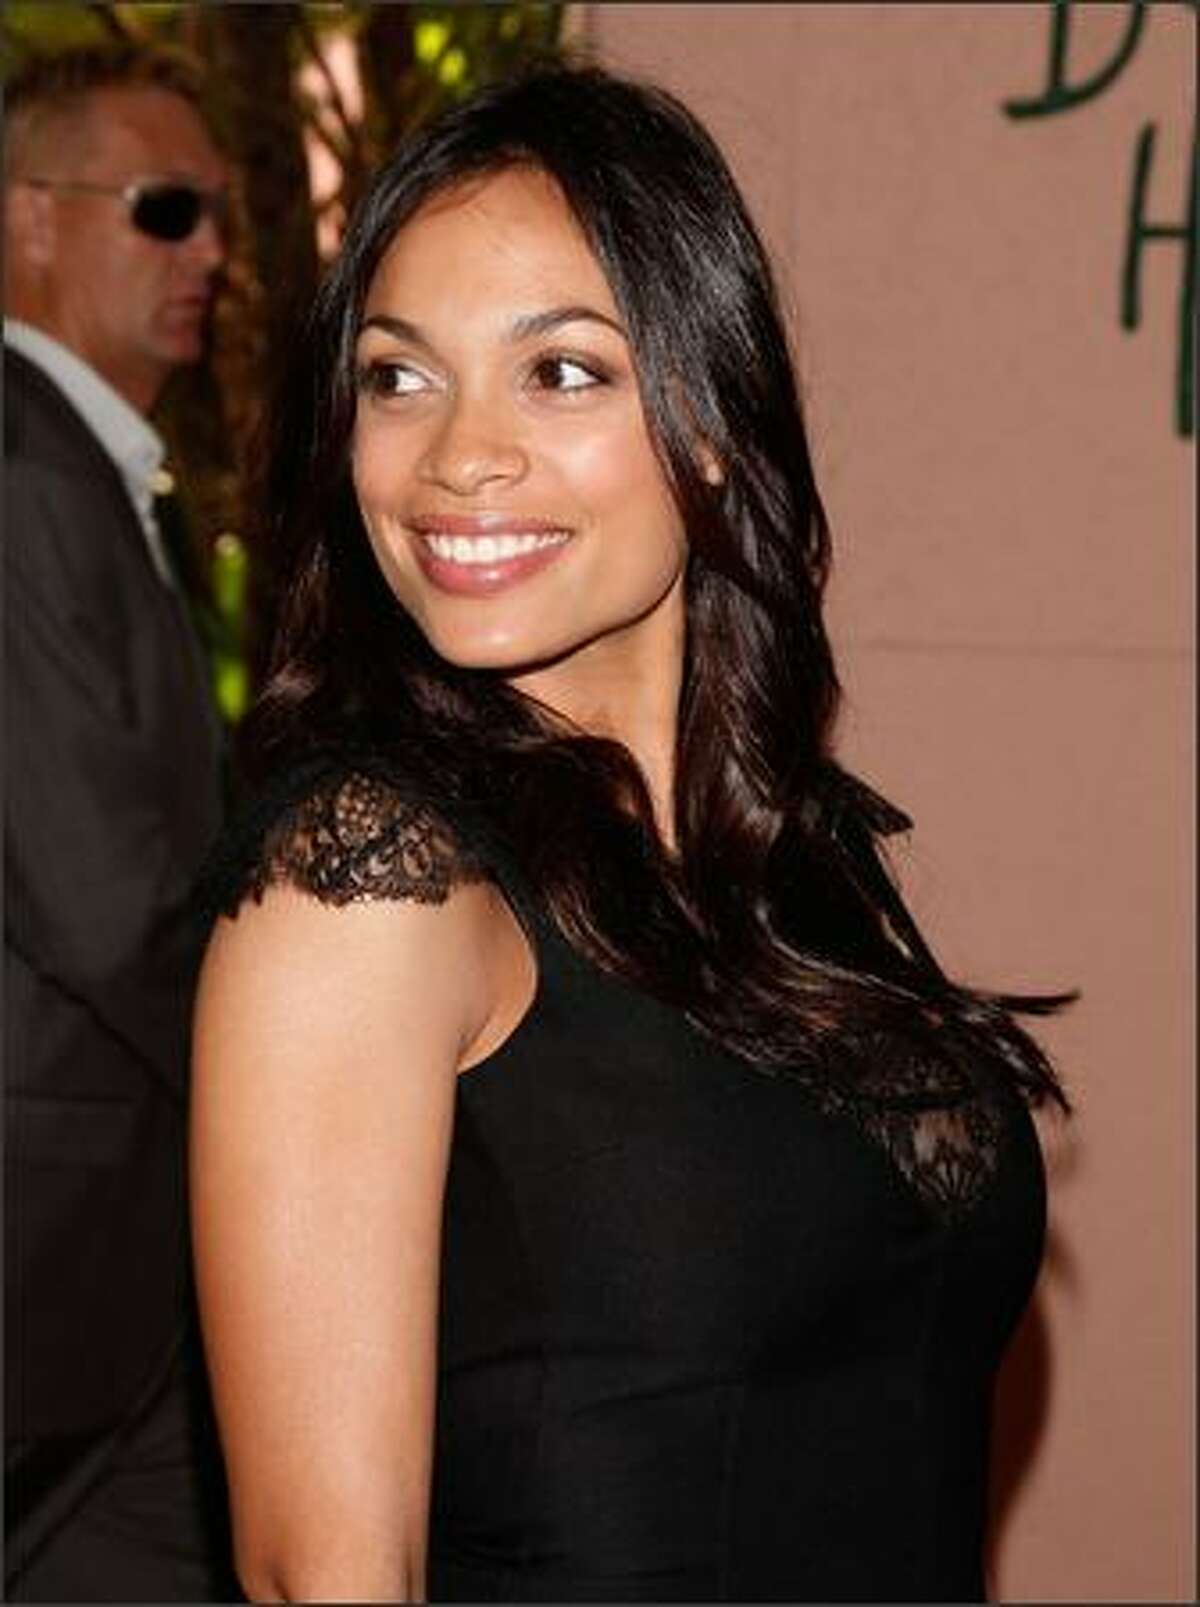 Actress Rosario Dawson arrives at the Hollywood Foreign Press Association's annual summer luncheon held at the Beverly Hills Hotel on Wednesday in Beverly Hills, Calif.